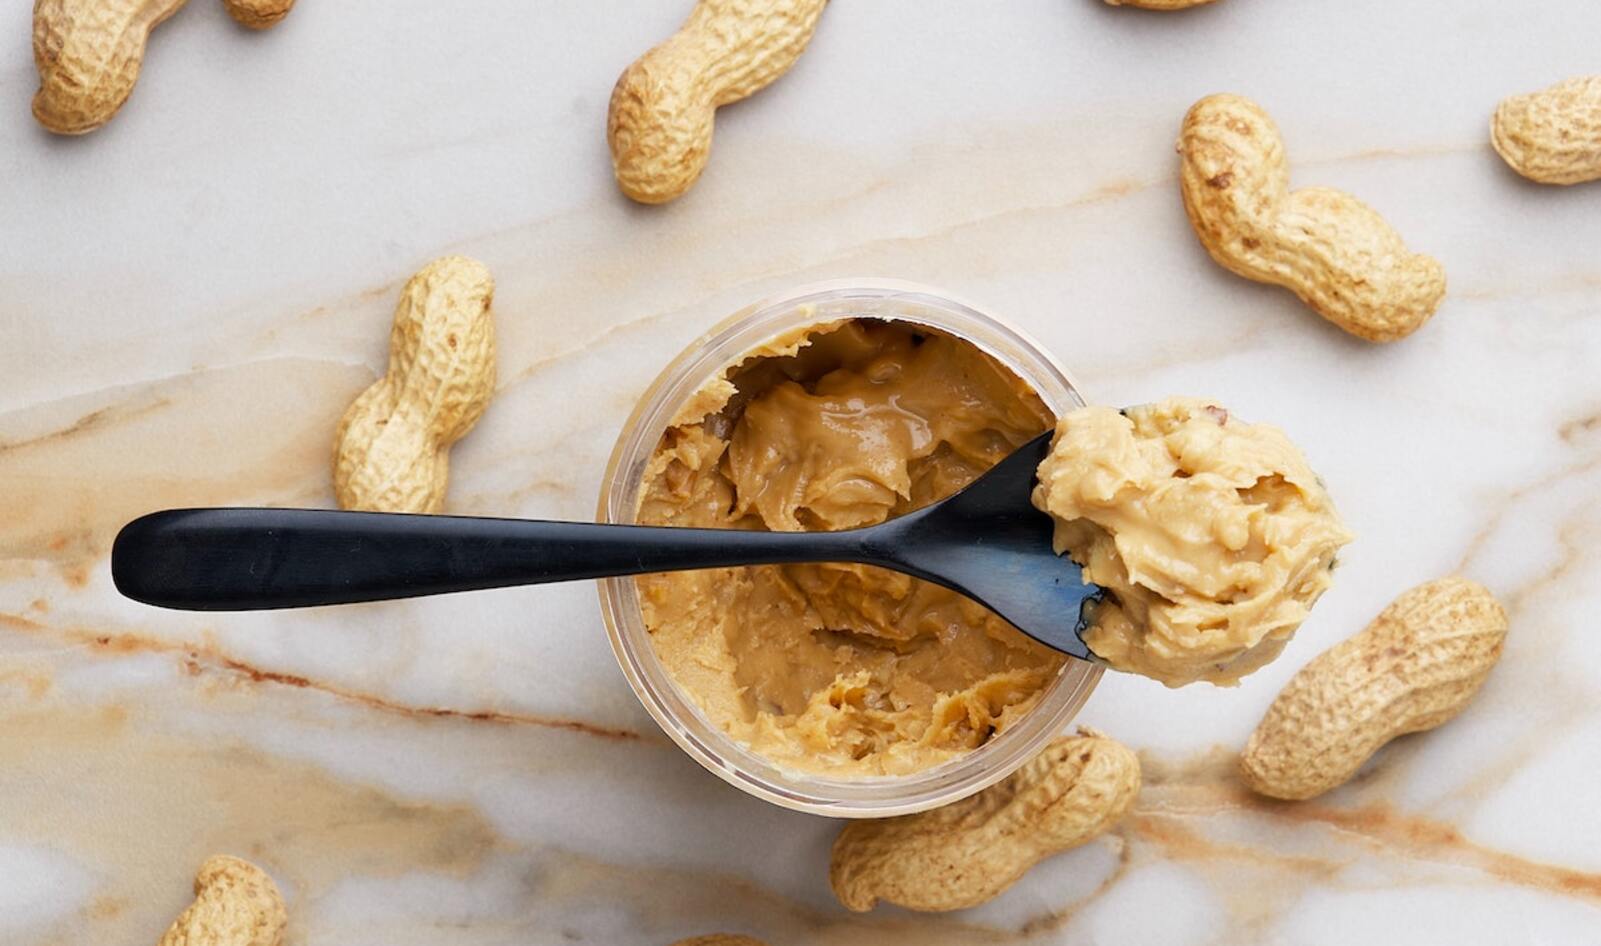 Is Nut Butter Healthy? Here Are the Best Vegan Options